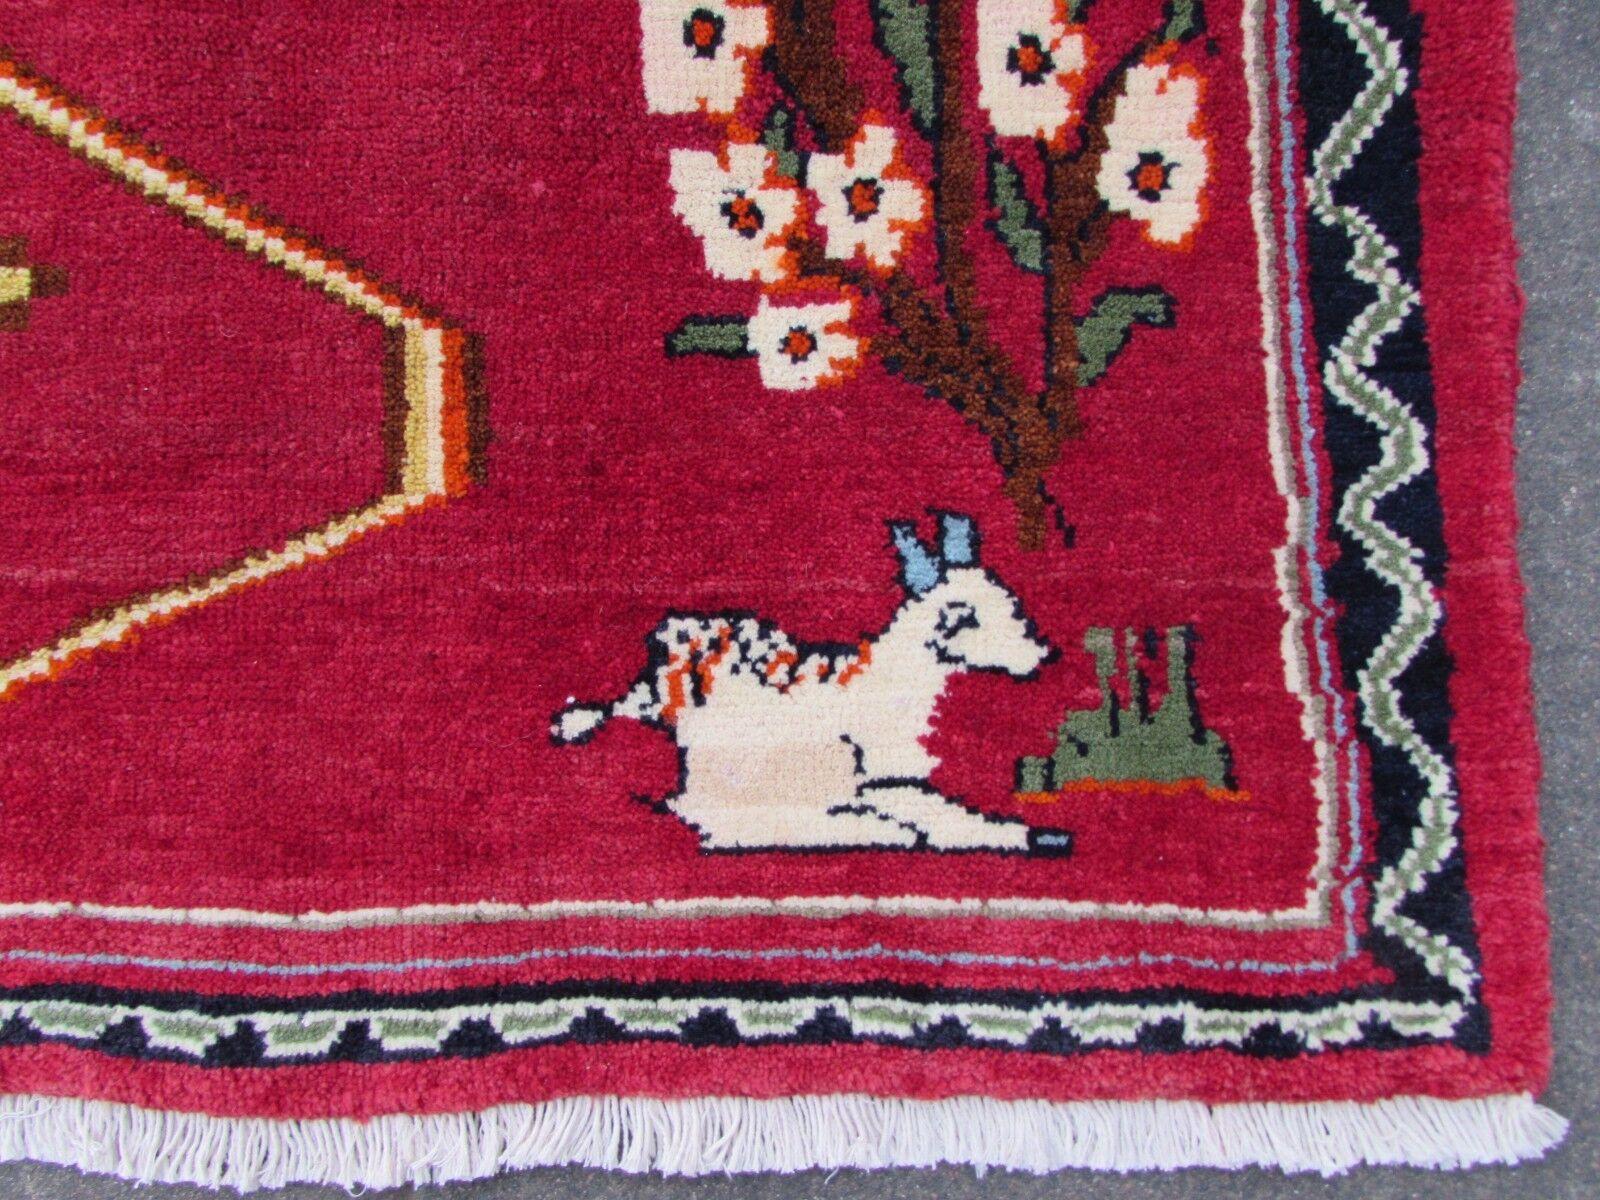 Handmade Vintage Persian Style Gabbeh Red Rug 4.1' x 5.3', 1970s, 1Q60 For Sale 5